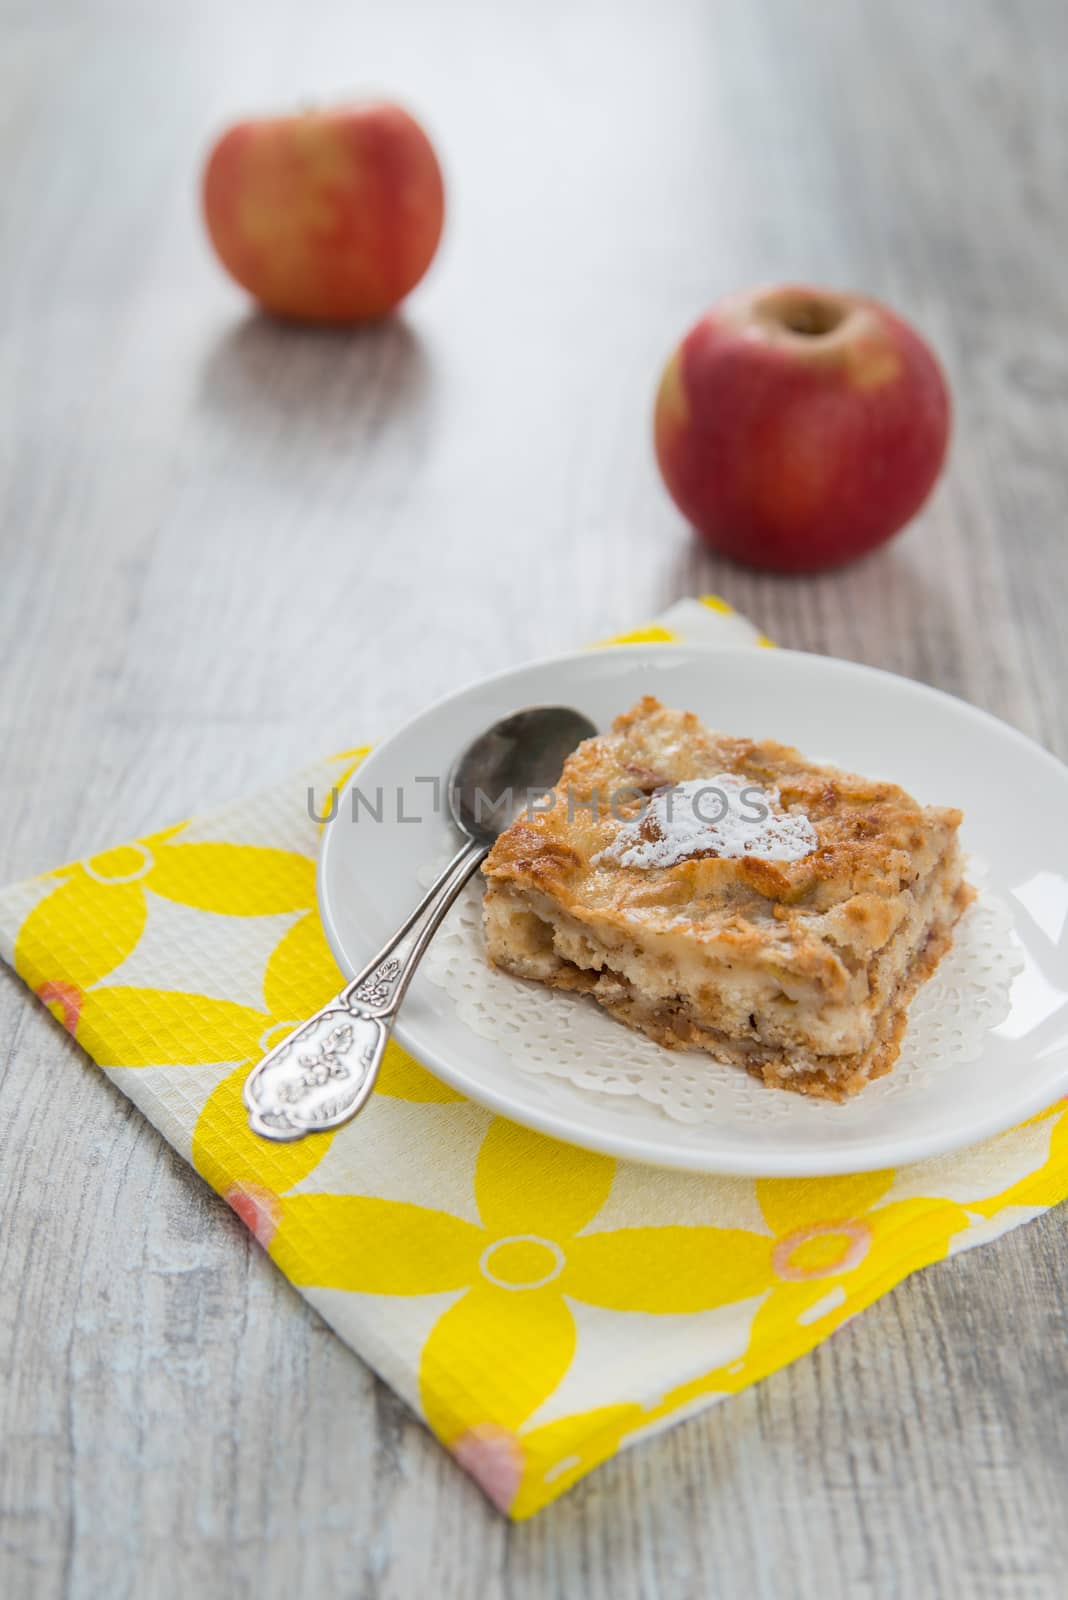 Piece of an apple pie and two apples